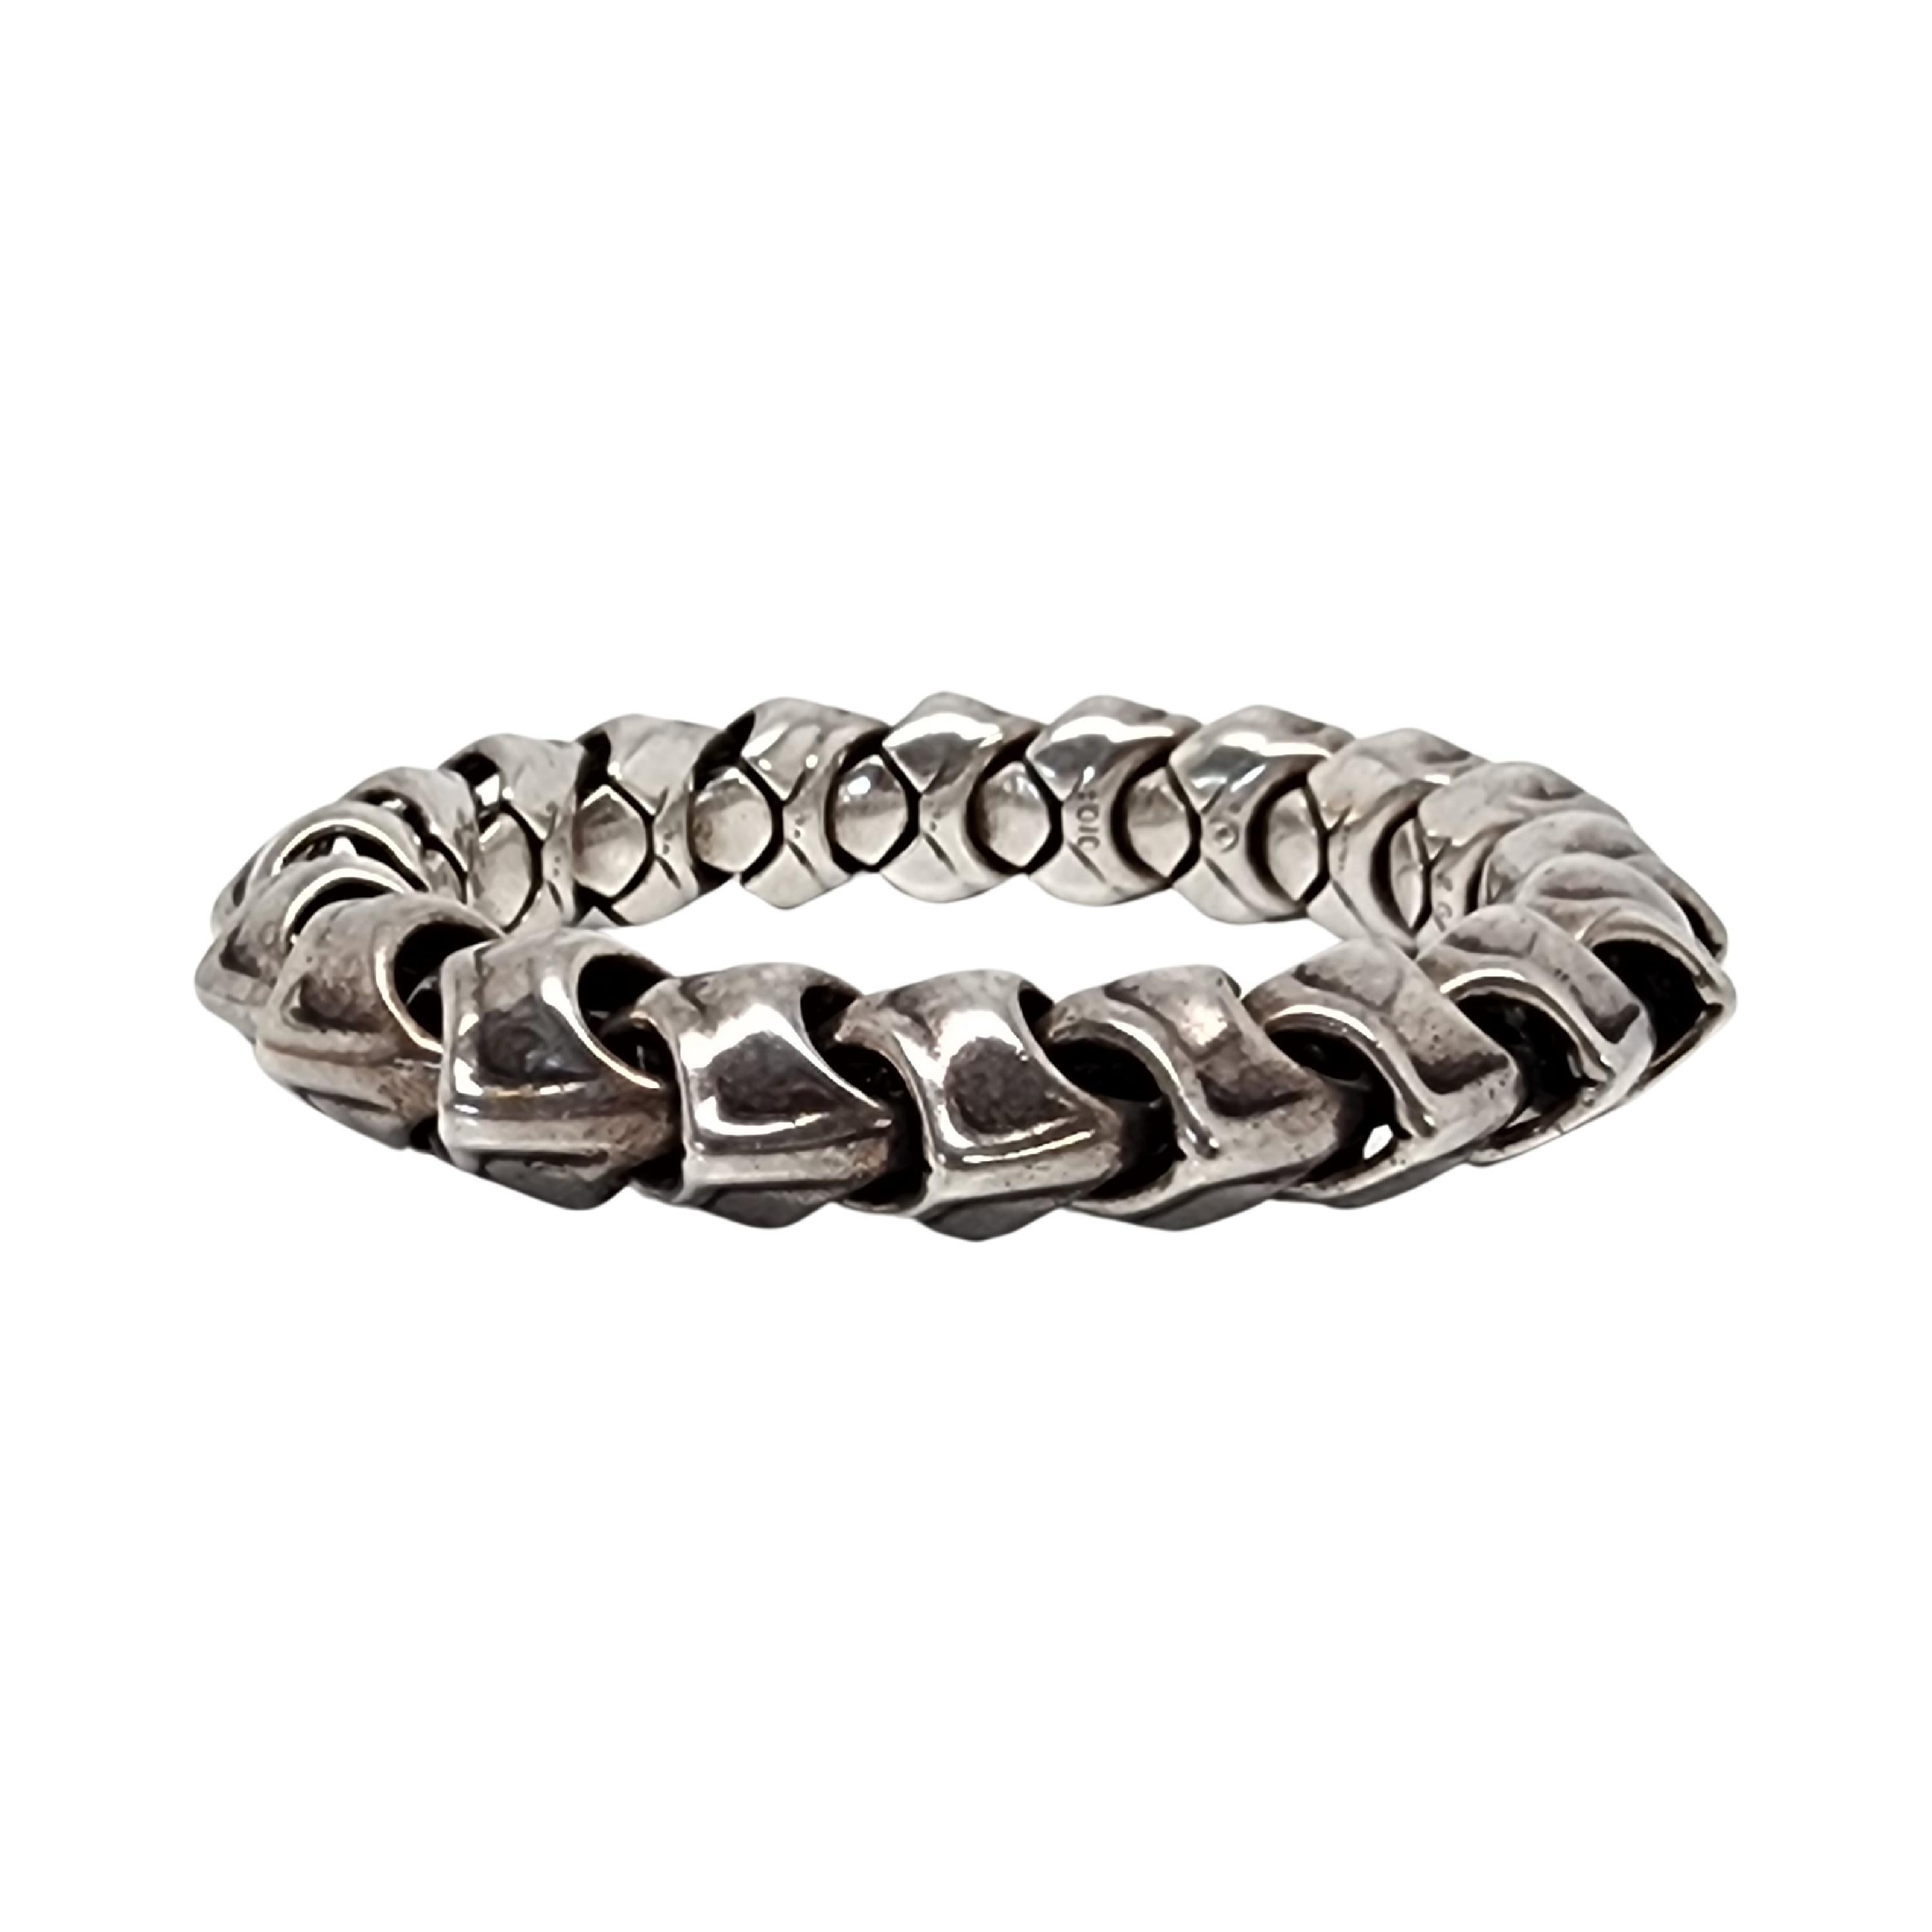 DLA Silverware Sterling Silver Vertebrae Mens Bracelet

Designed by the renowned David Leroy Anderson of Malibu, who creates jewelry pieces that are 